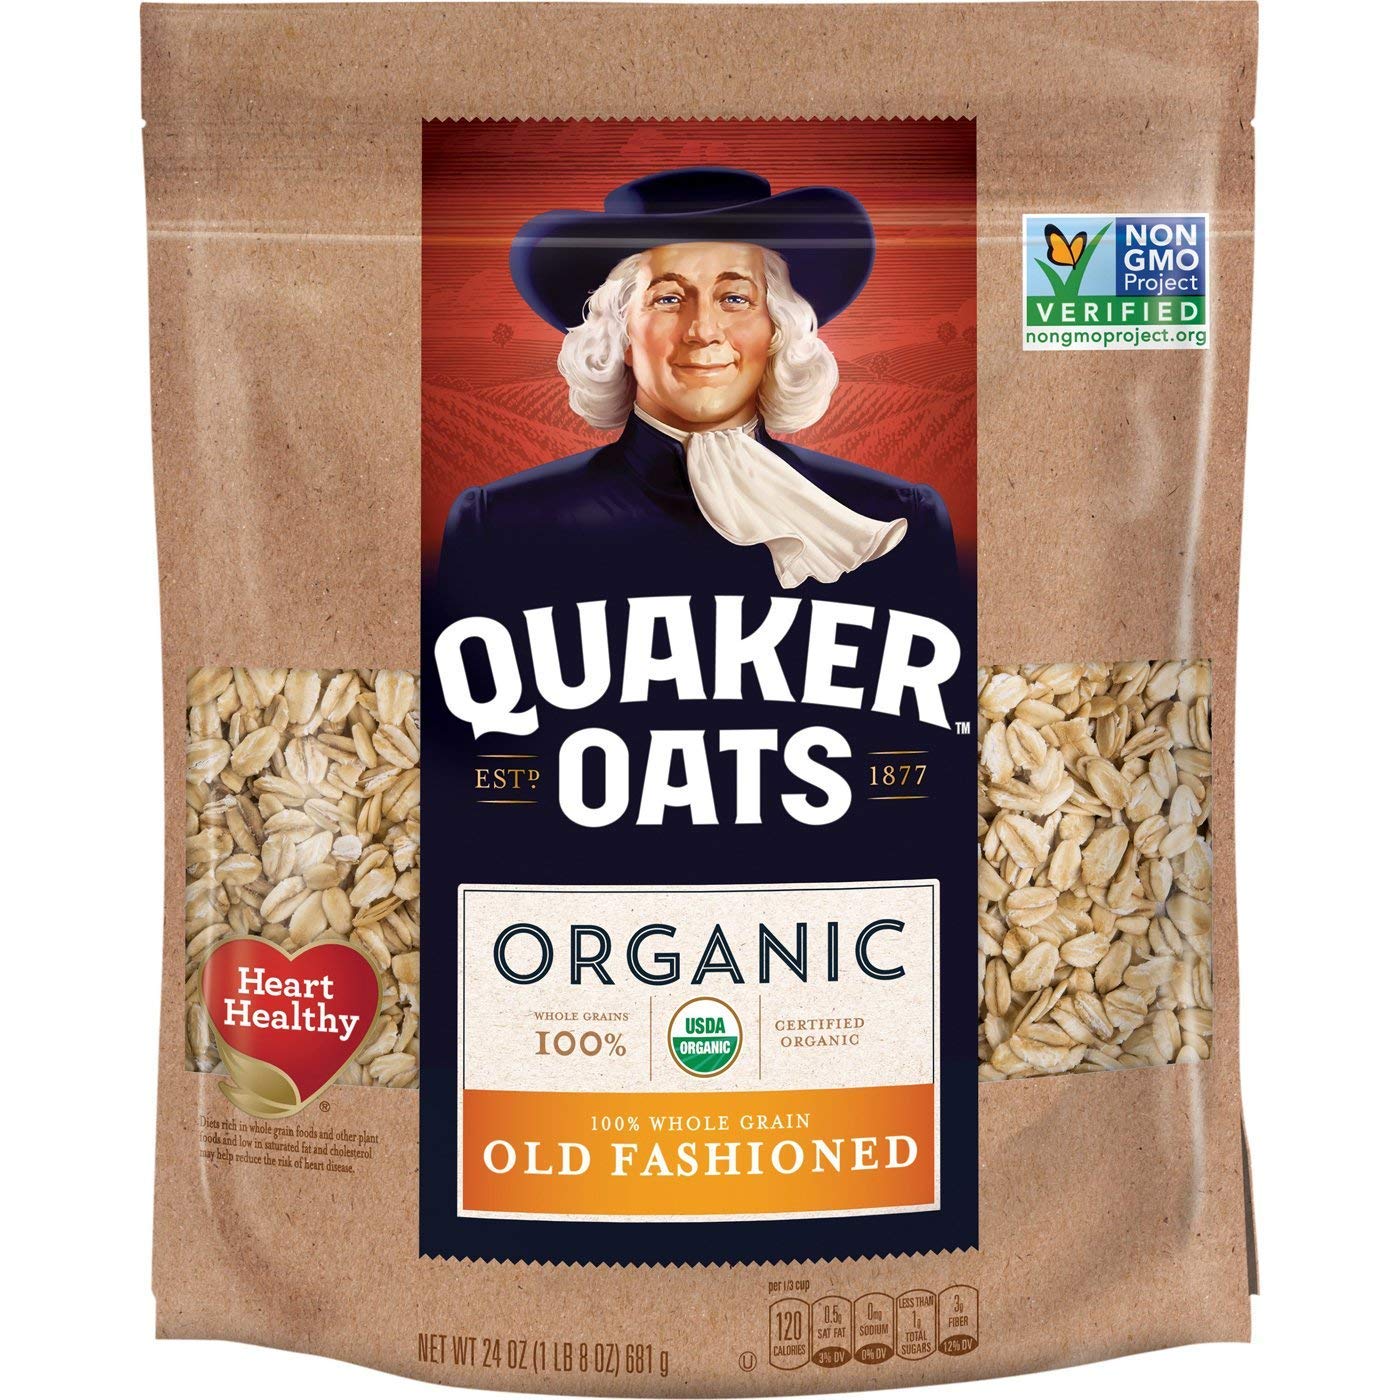 Quaker old fashioned rolled oats